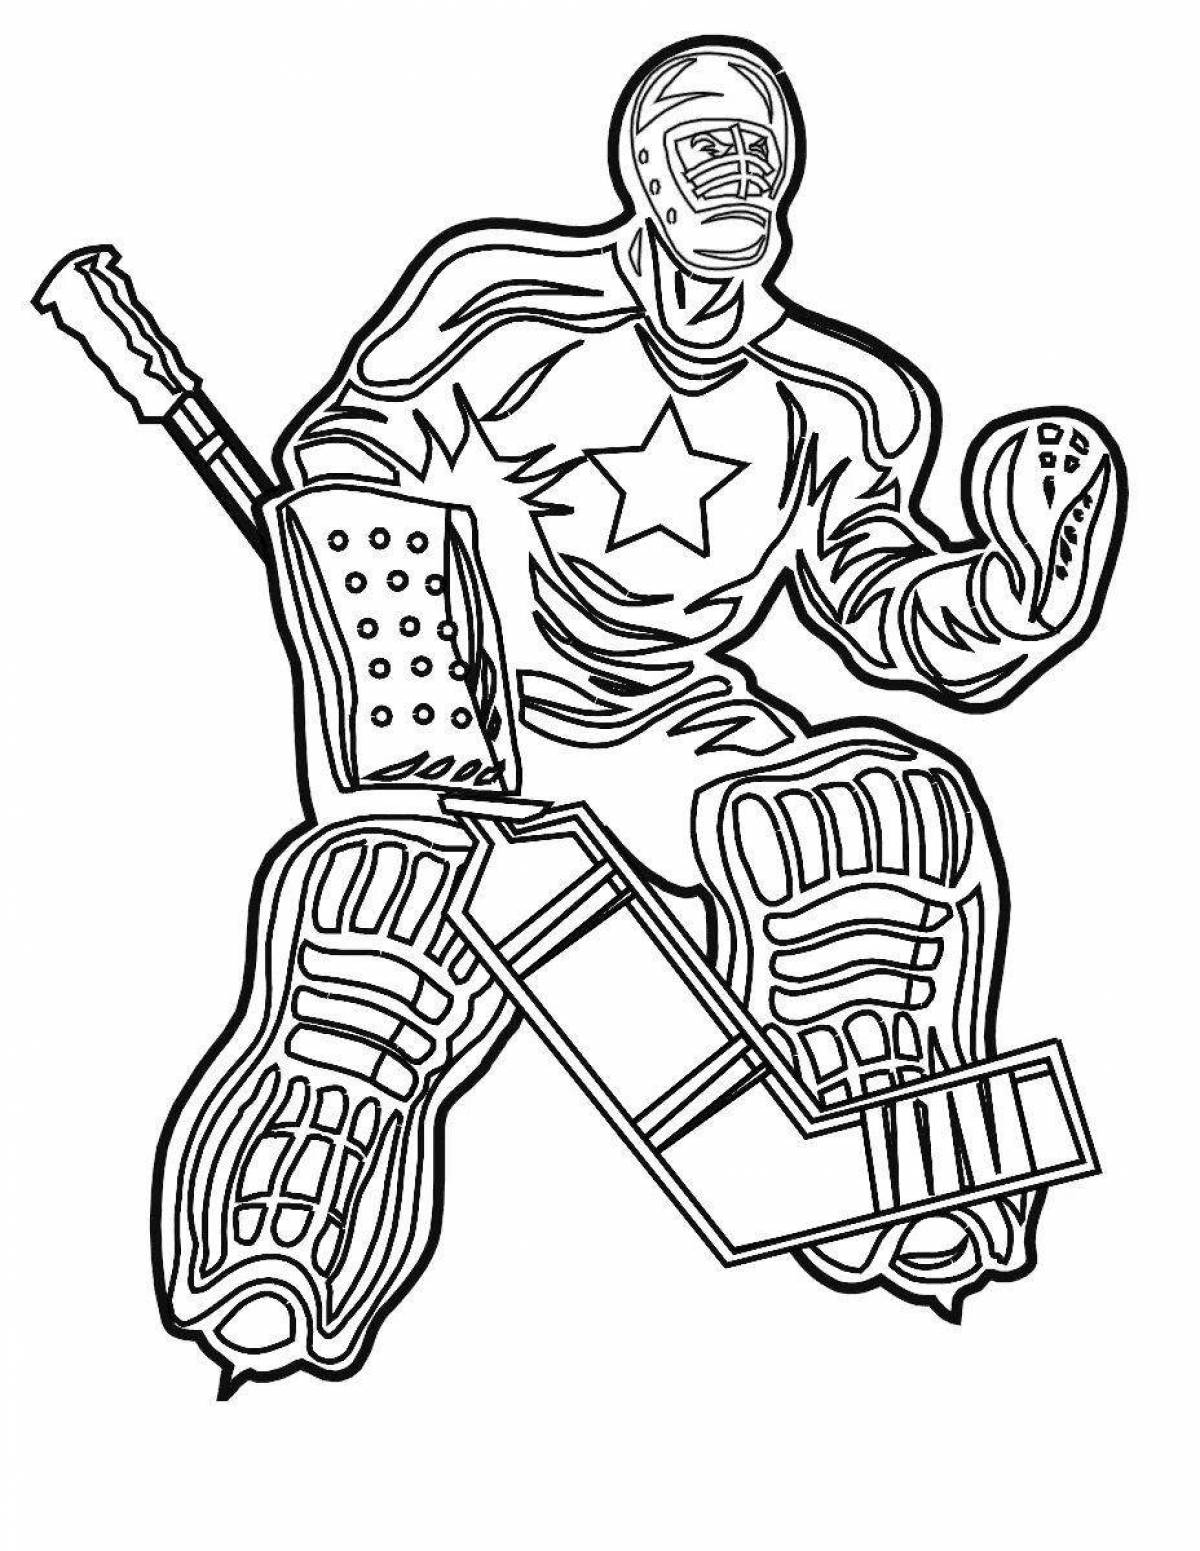 Fun Hockey Goalie Coloring Page